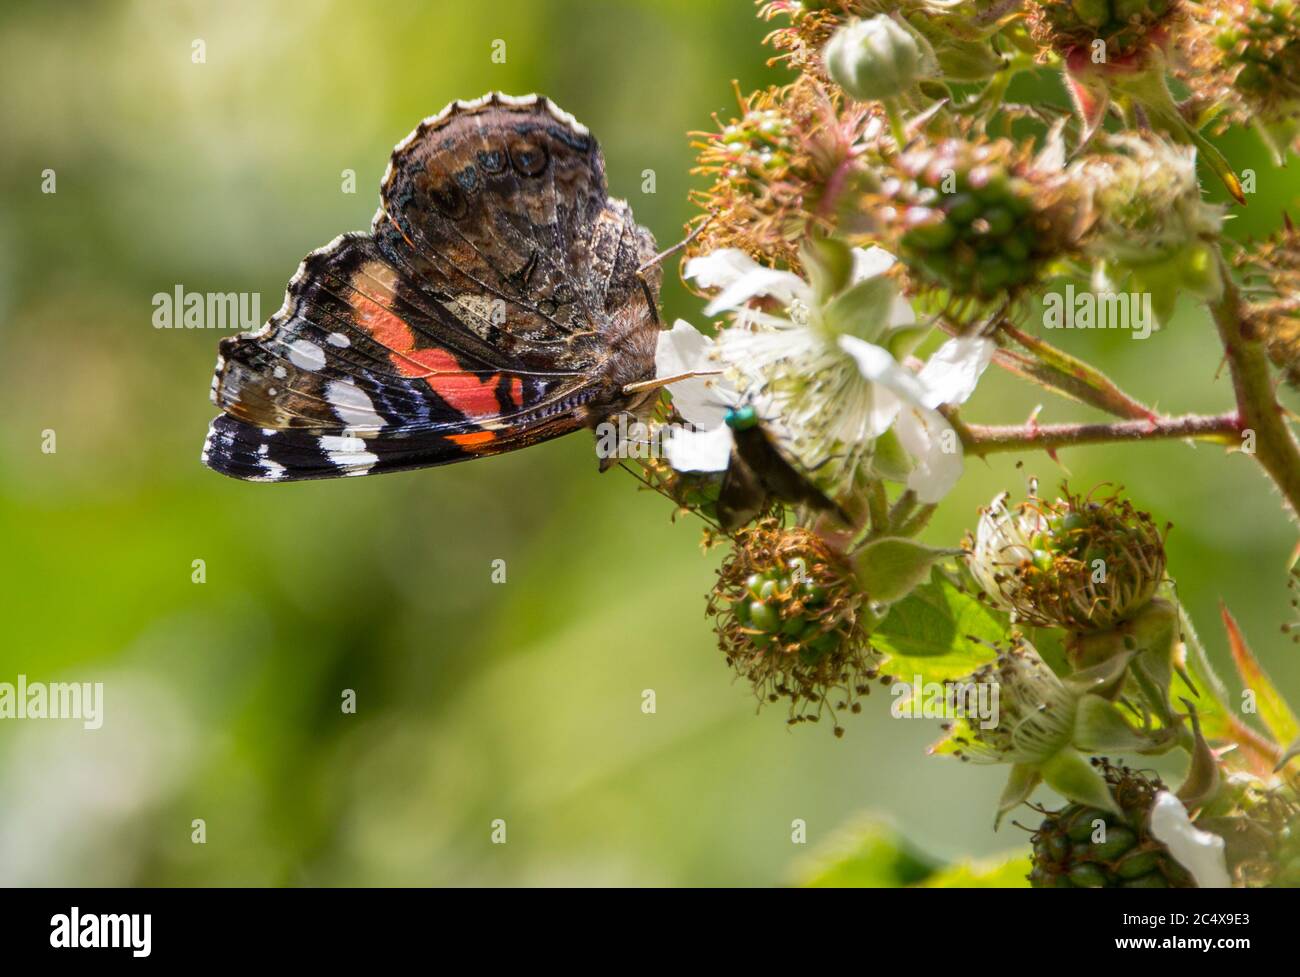 Red admiral butterfly (Vanessa atalanta) feeding with closed wings showing  underwings of marbled smoky grey red bands and white spots. Stock Photo